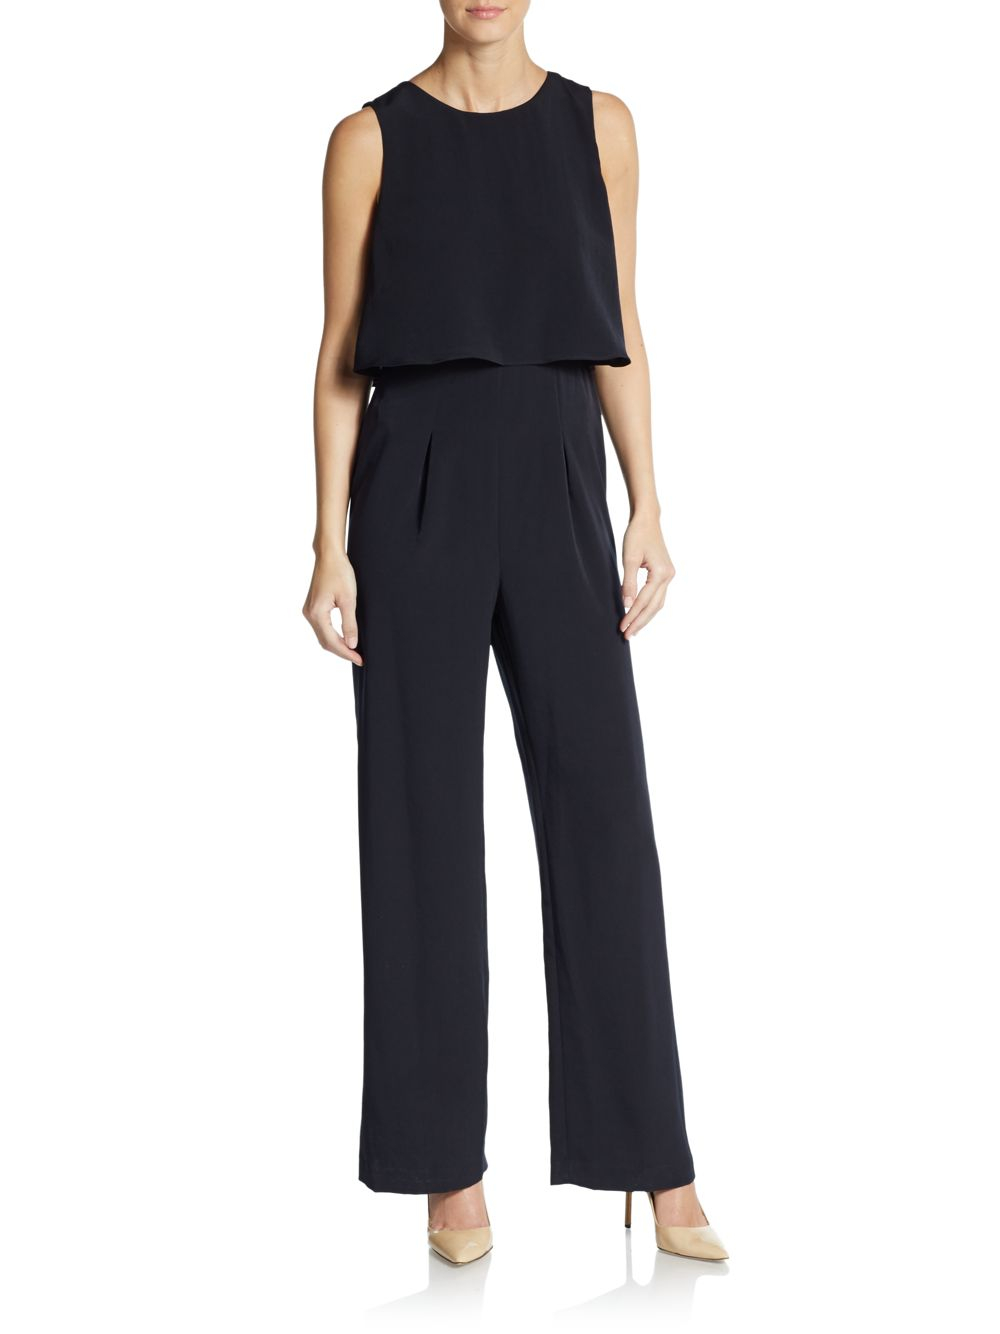 Lyst - Ivanka Trump Double Layered Tie Jumpsuit in Blue